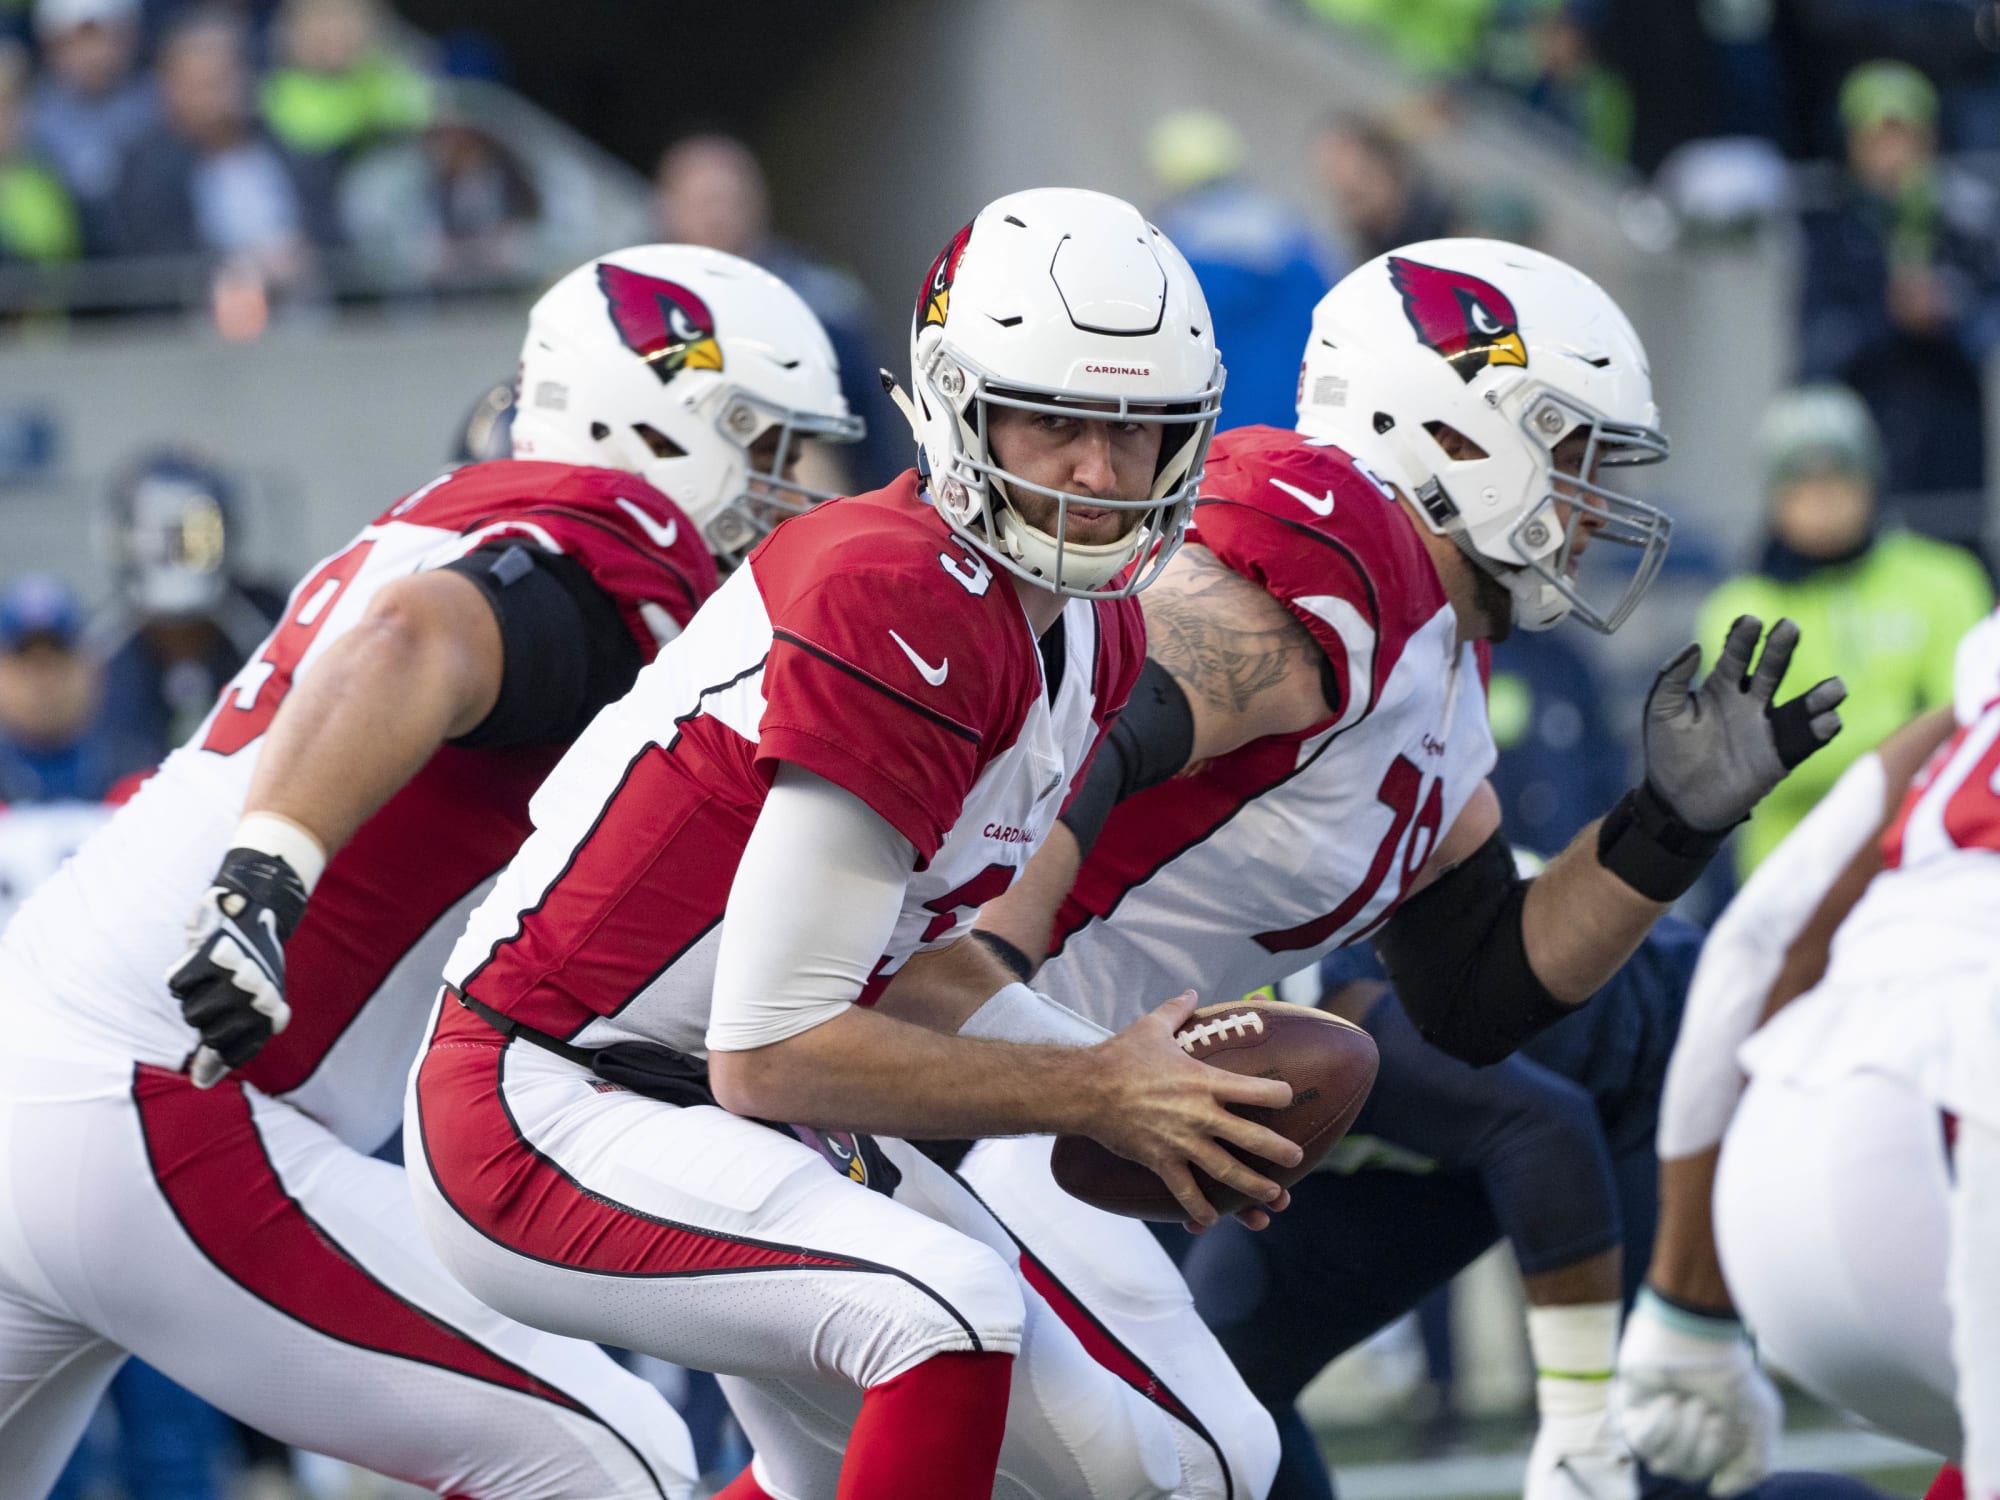 What are the biggest needs for the Arizona Cardinals this offseason?